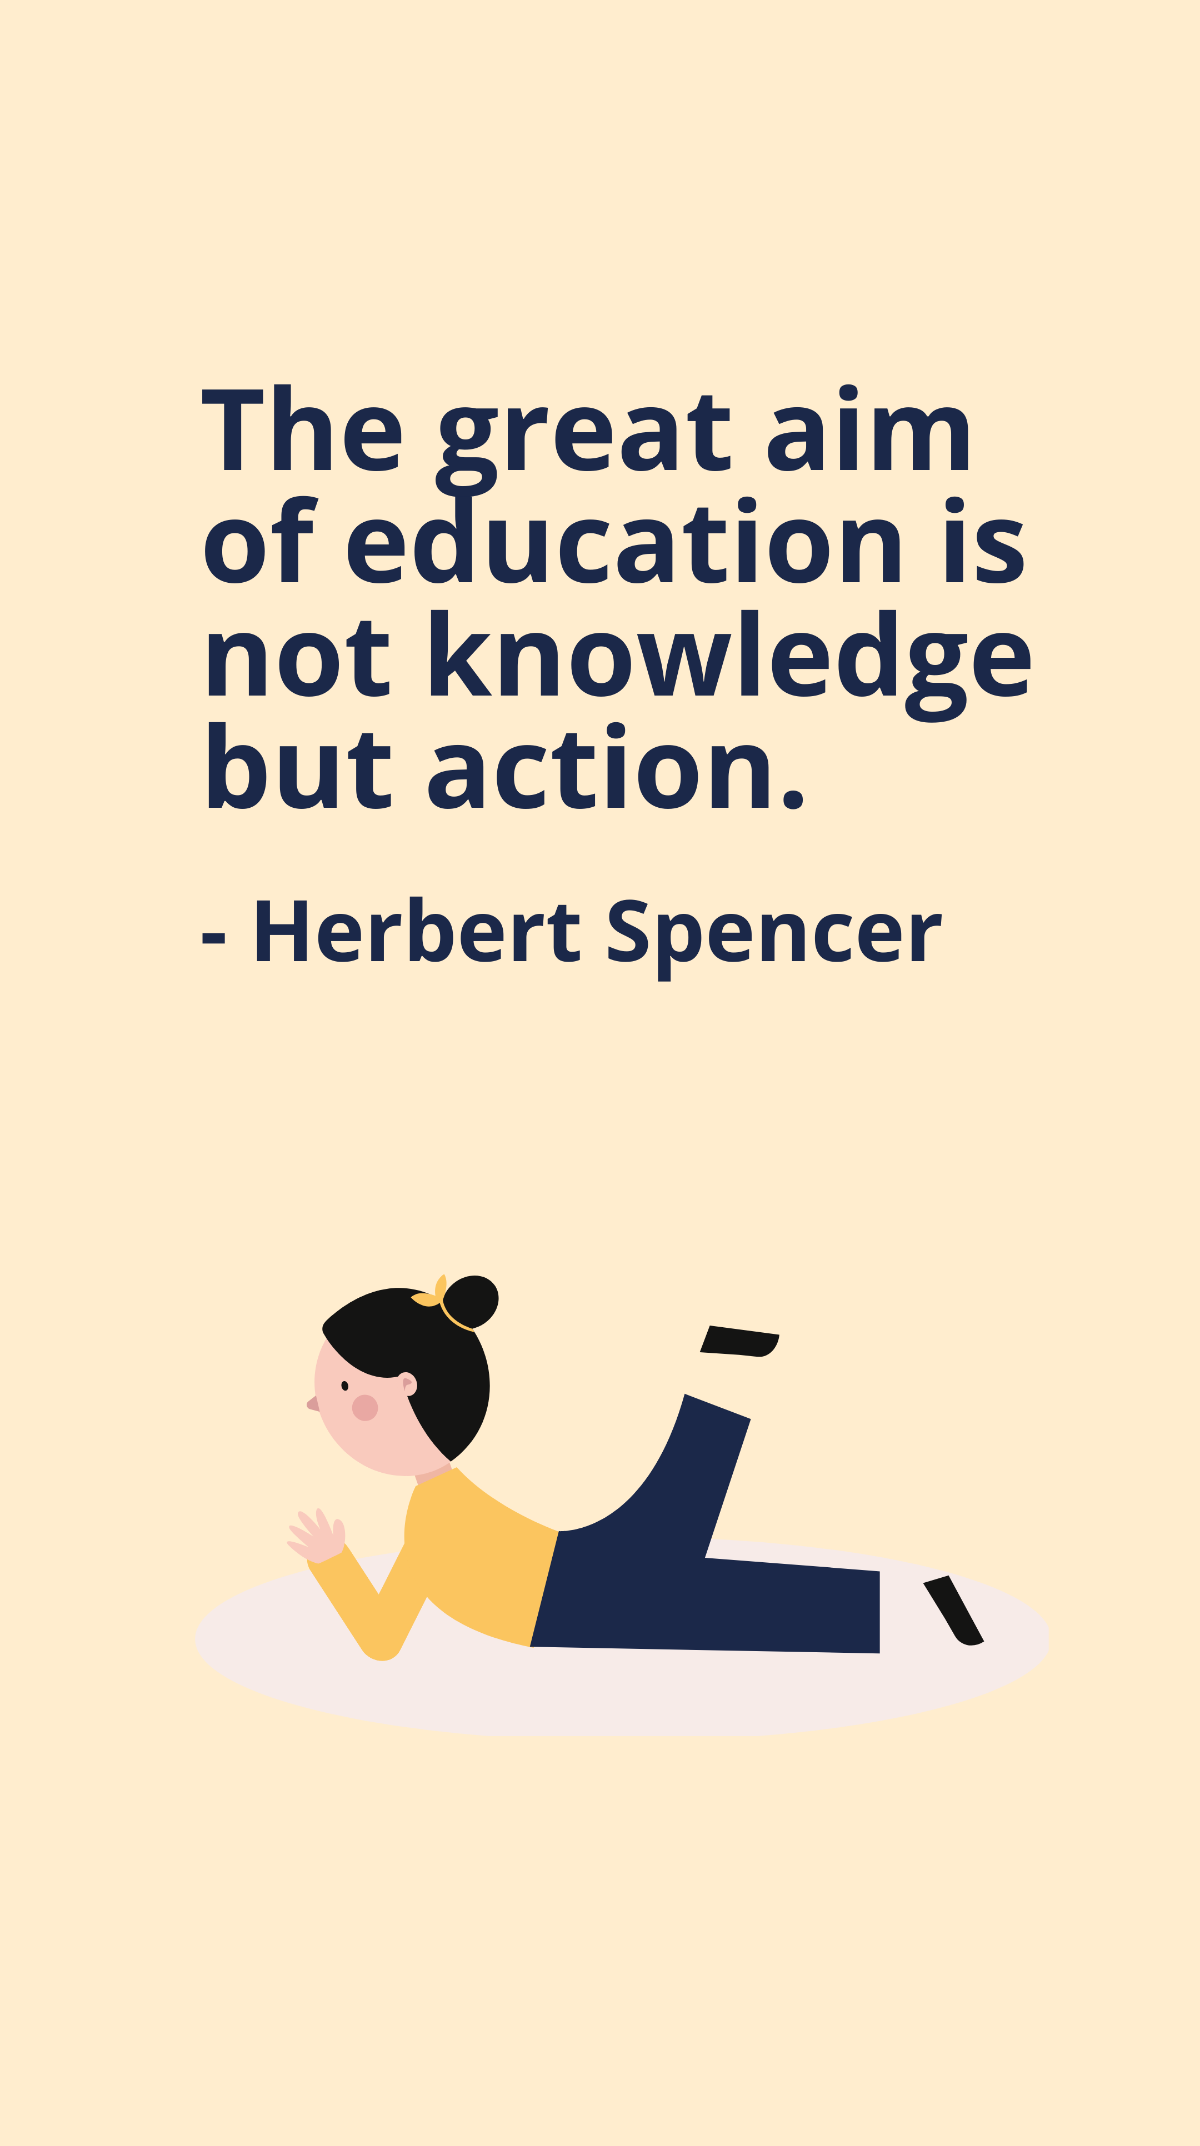 Herbert Spencer - The great aim of education is not knowledge but action. Template